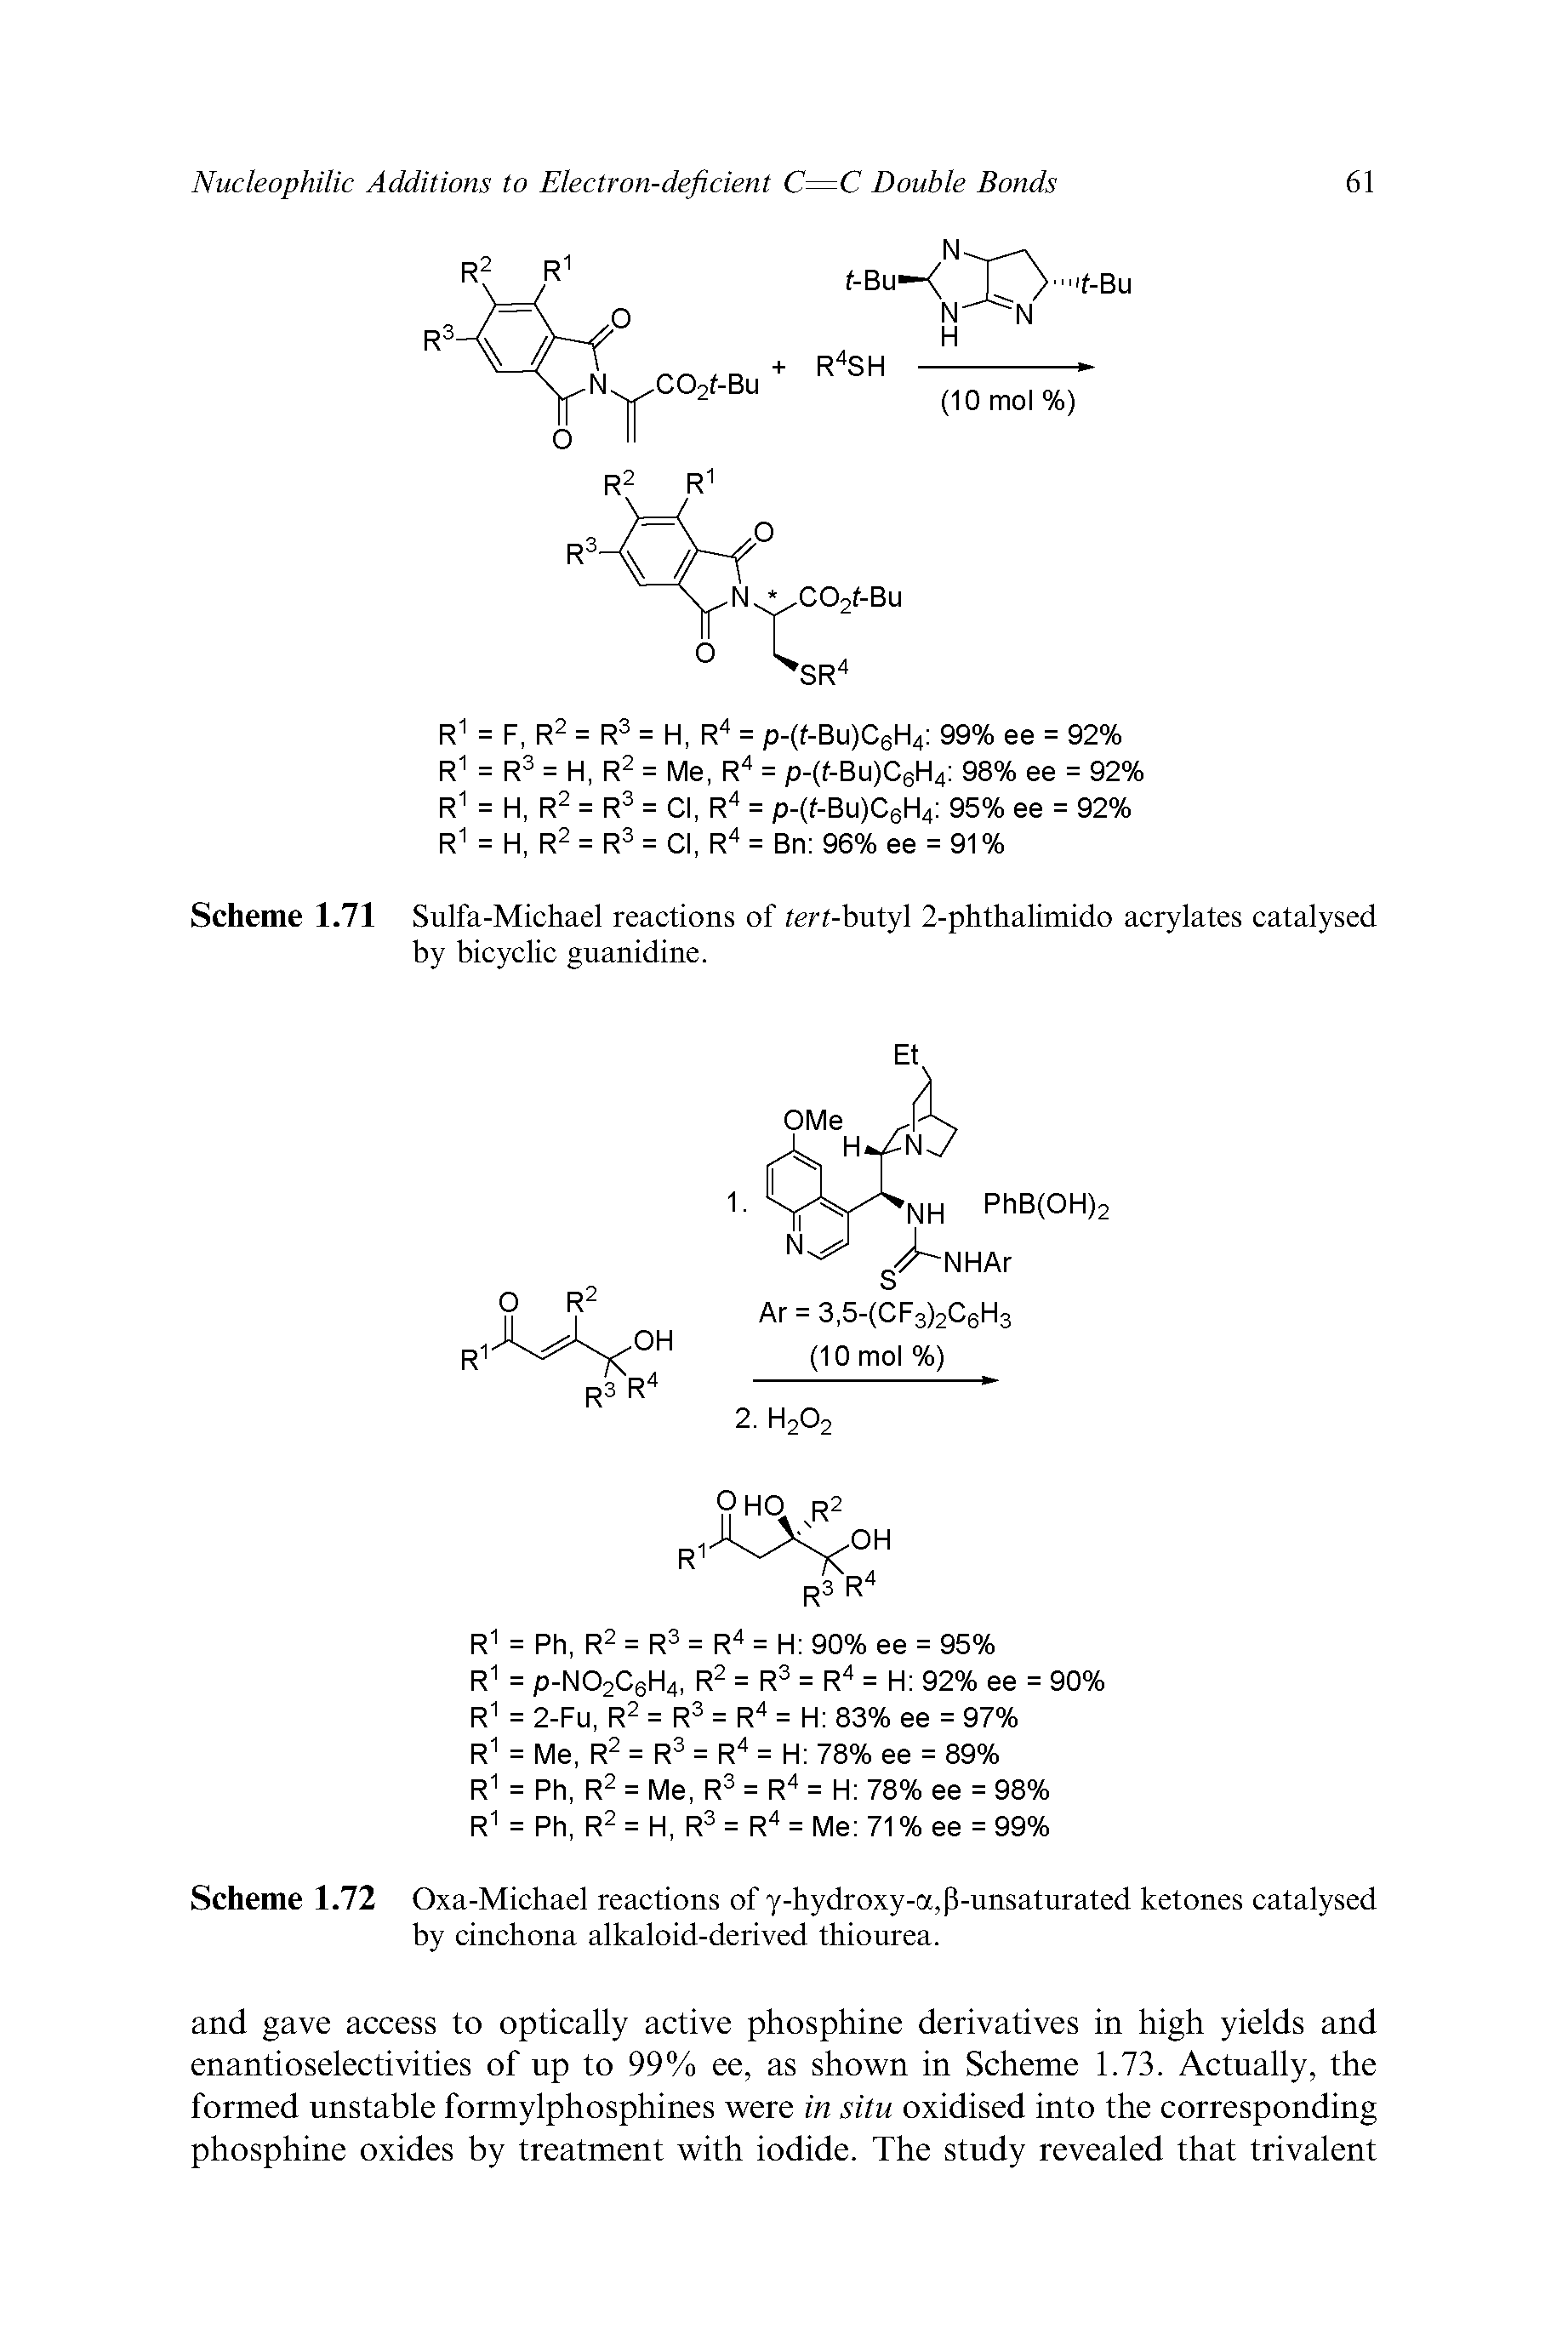 Scheme 1.71 Sulfa-Michael reactions of tert-butyl 2-phthalimido acrylates catalysed by bicyclic guanidine.